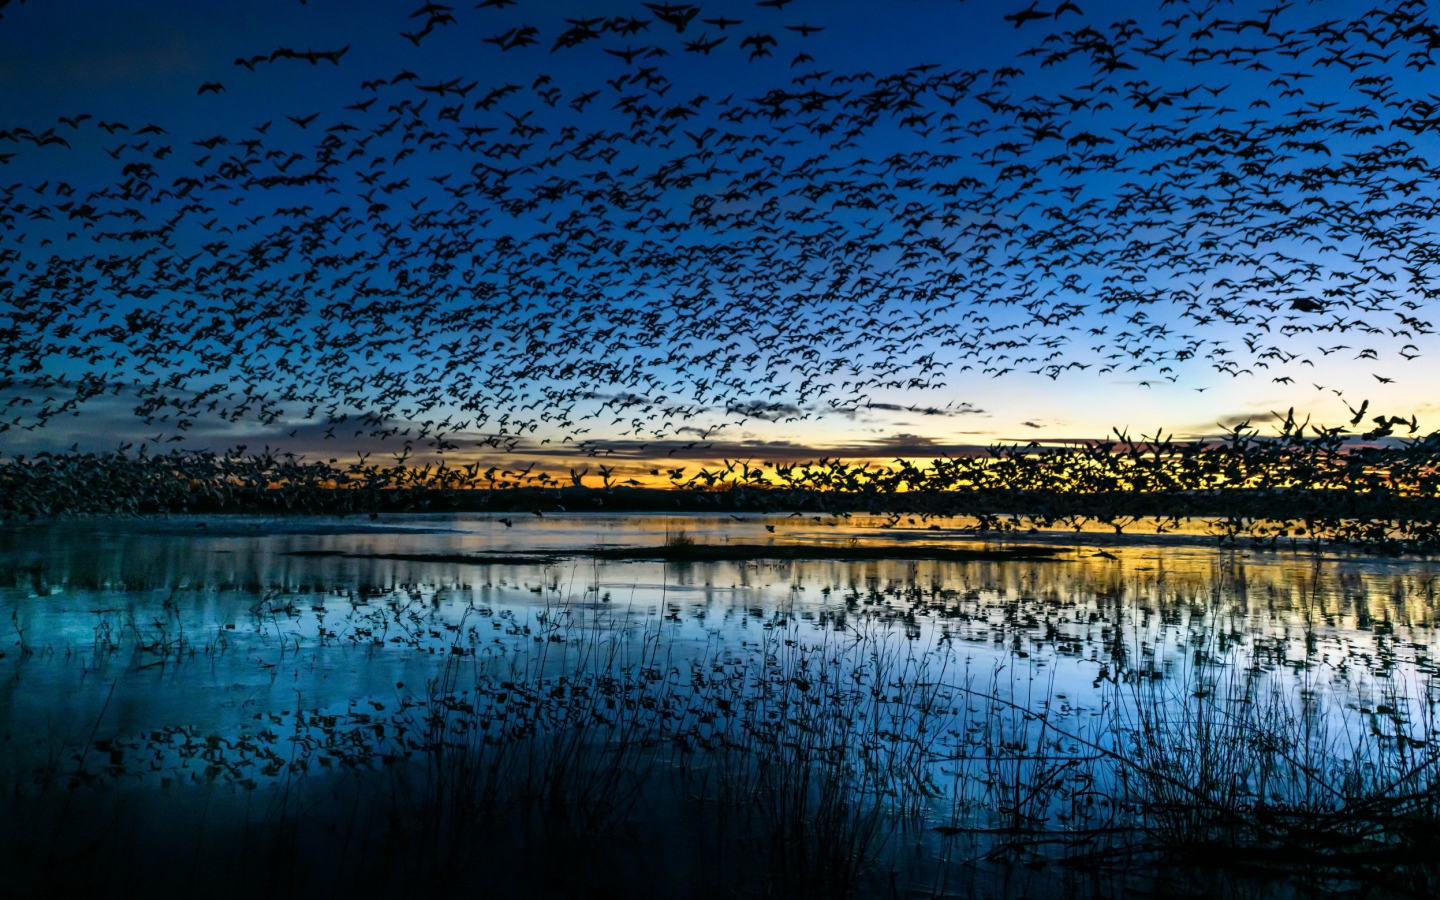 A flock of birds flies over the pond at dusk